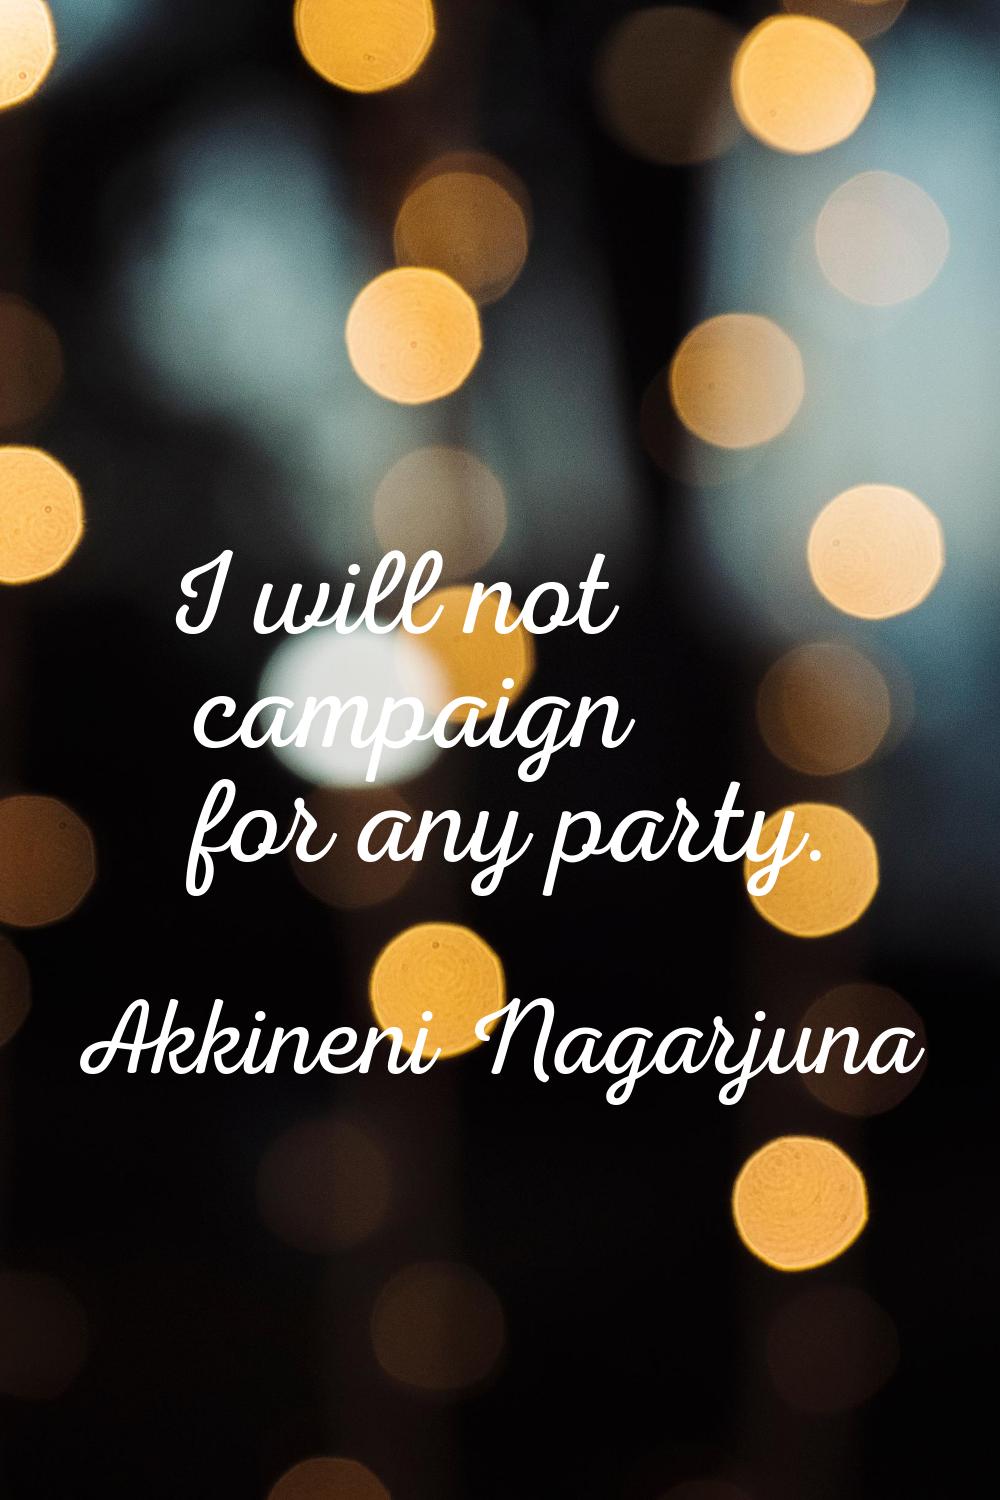 I will not campaign for any party.